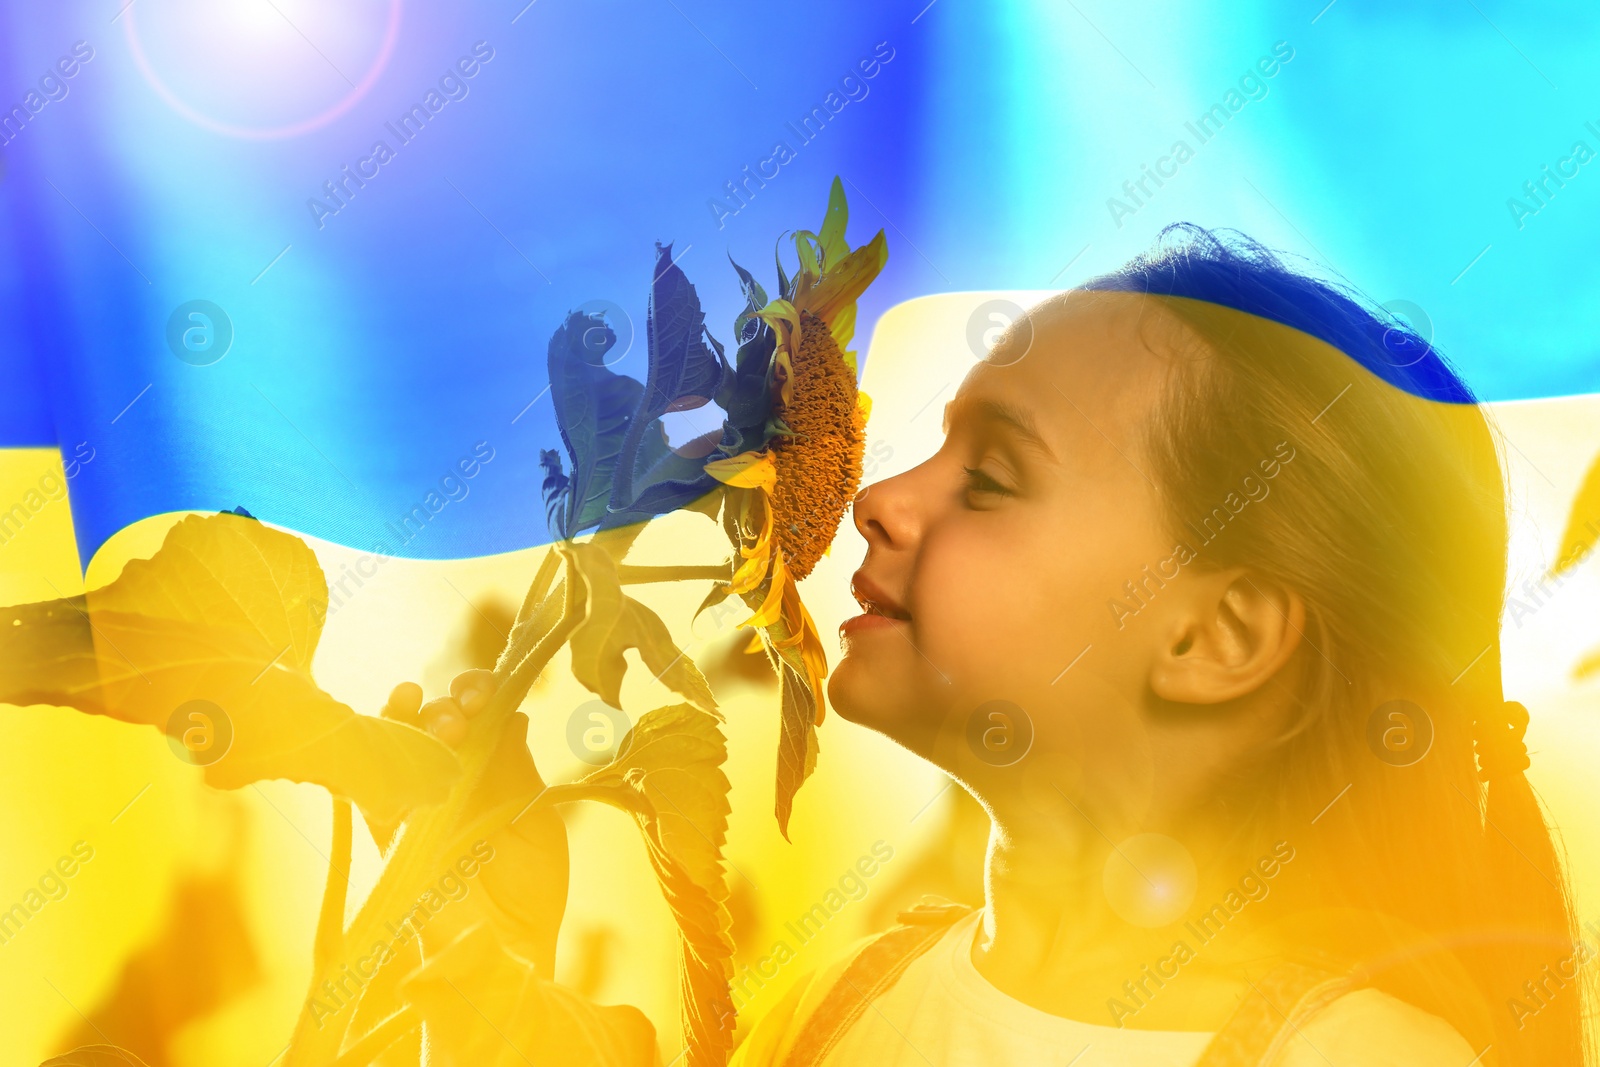 Image of Double exposure of cute little girl with sunflower and Ukrainian flag 